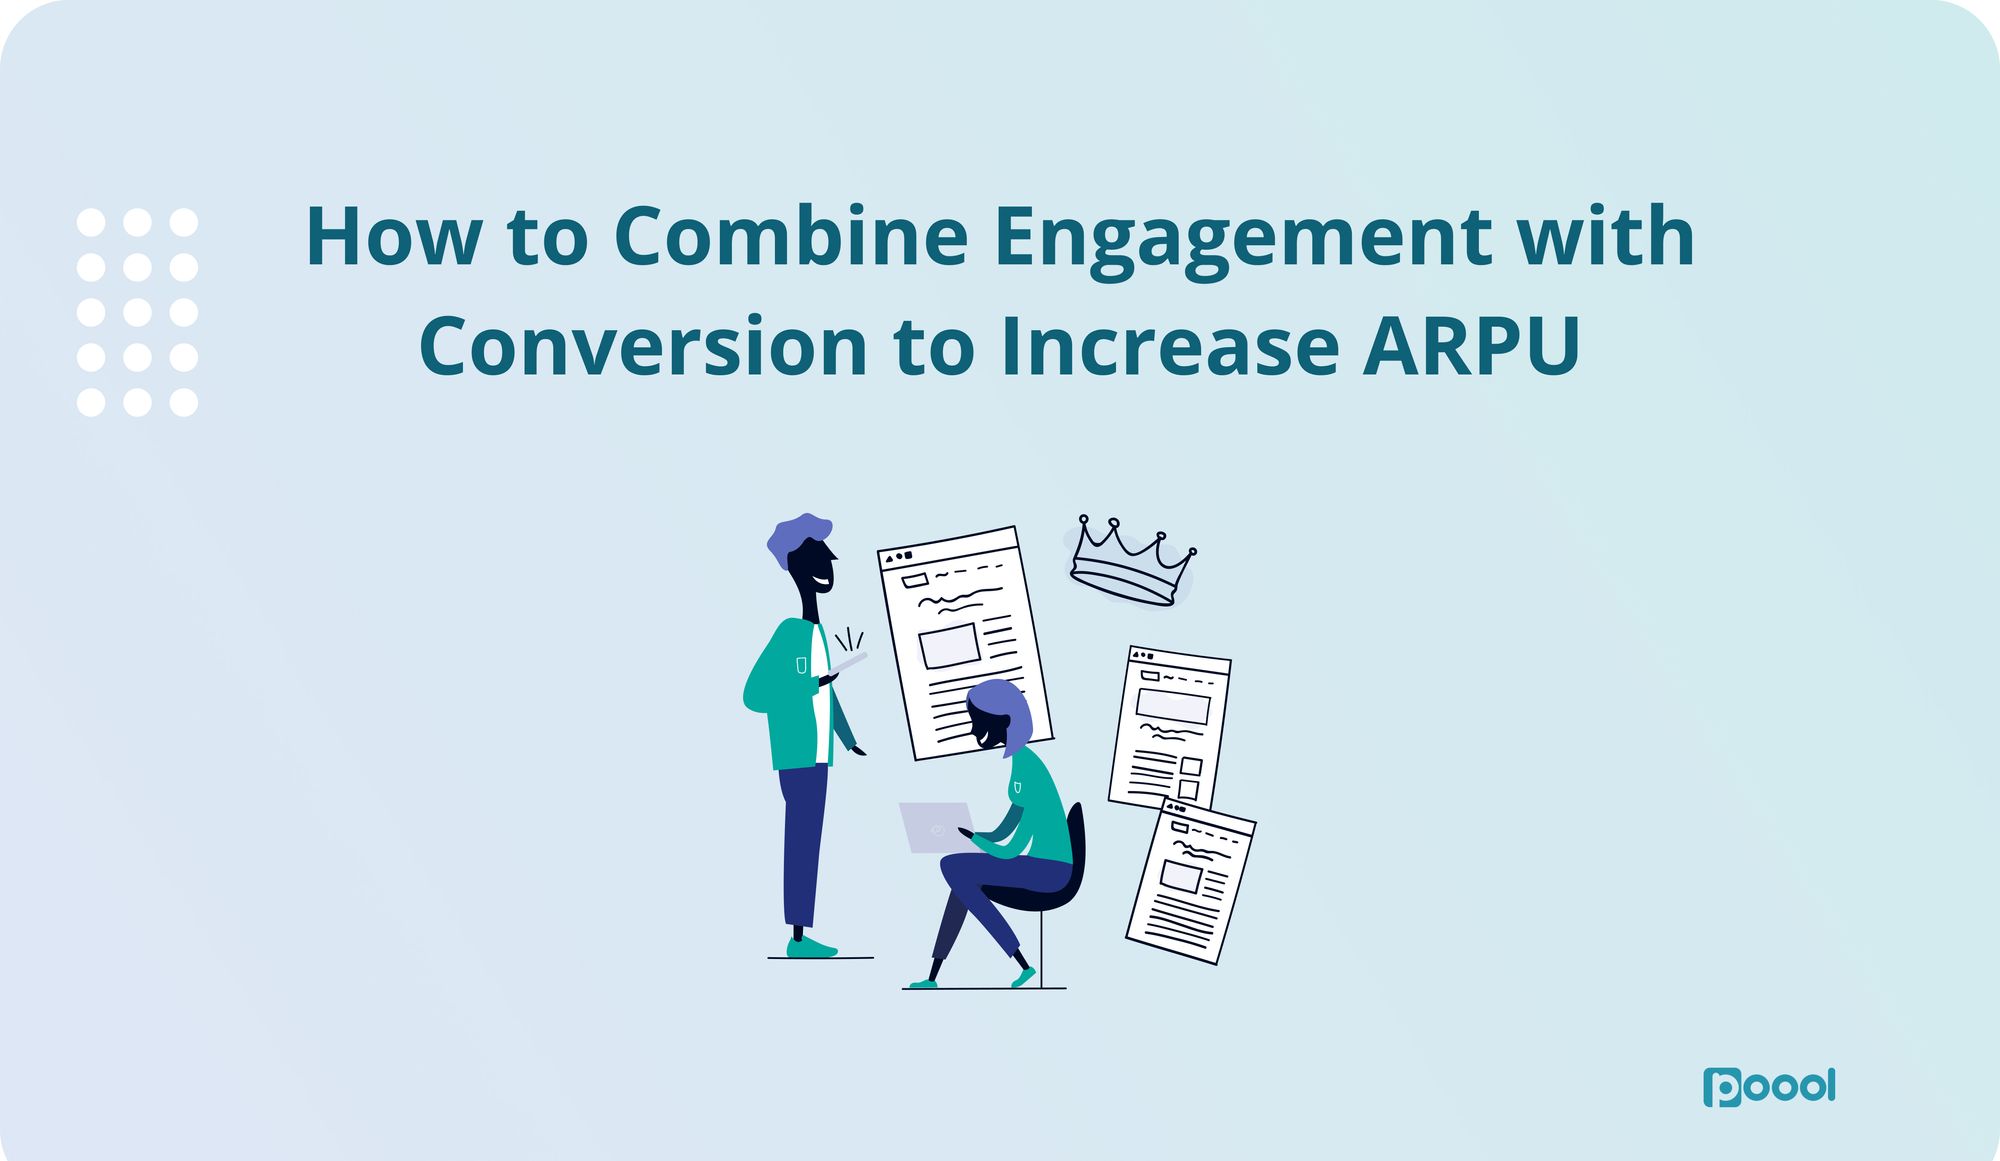 How to Combine Engagement with Conversion to Increase ARPU.